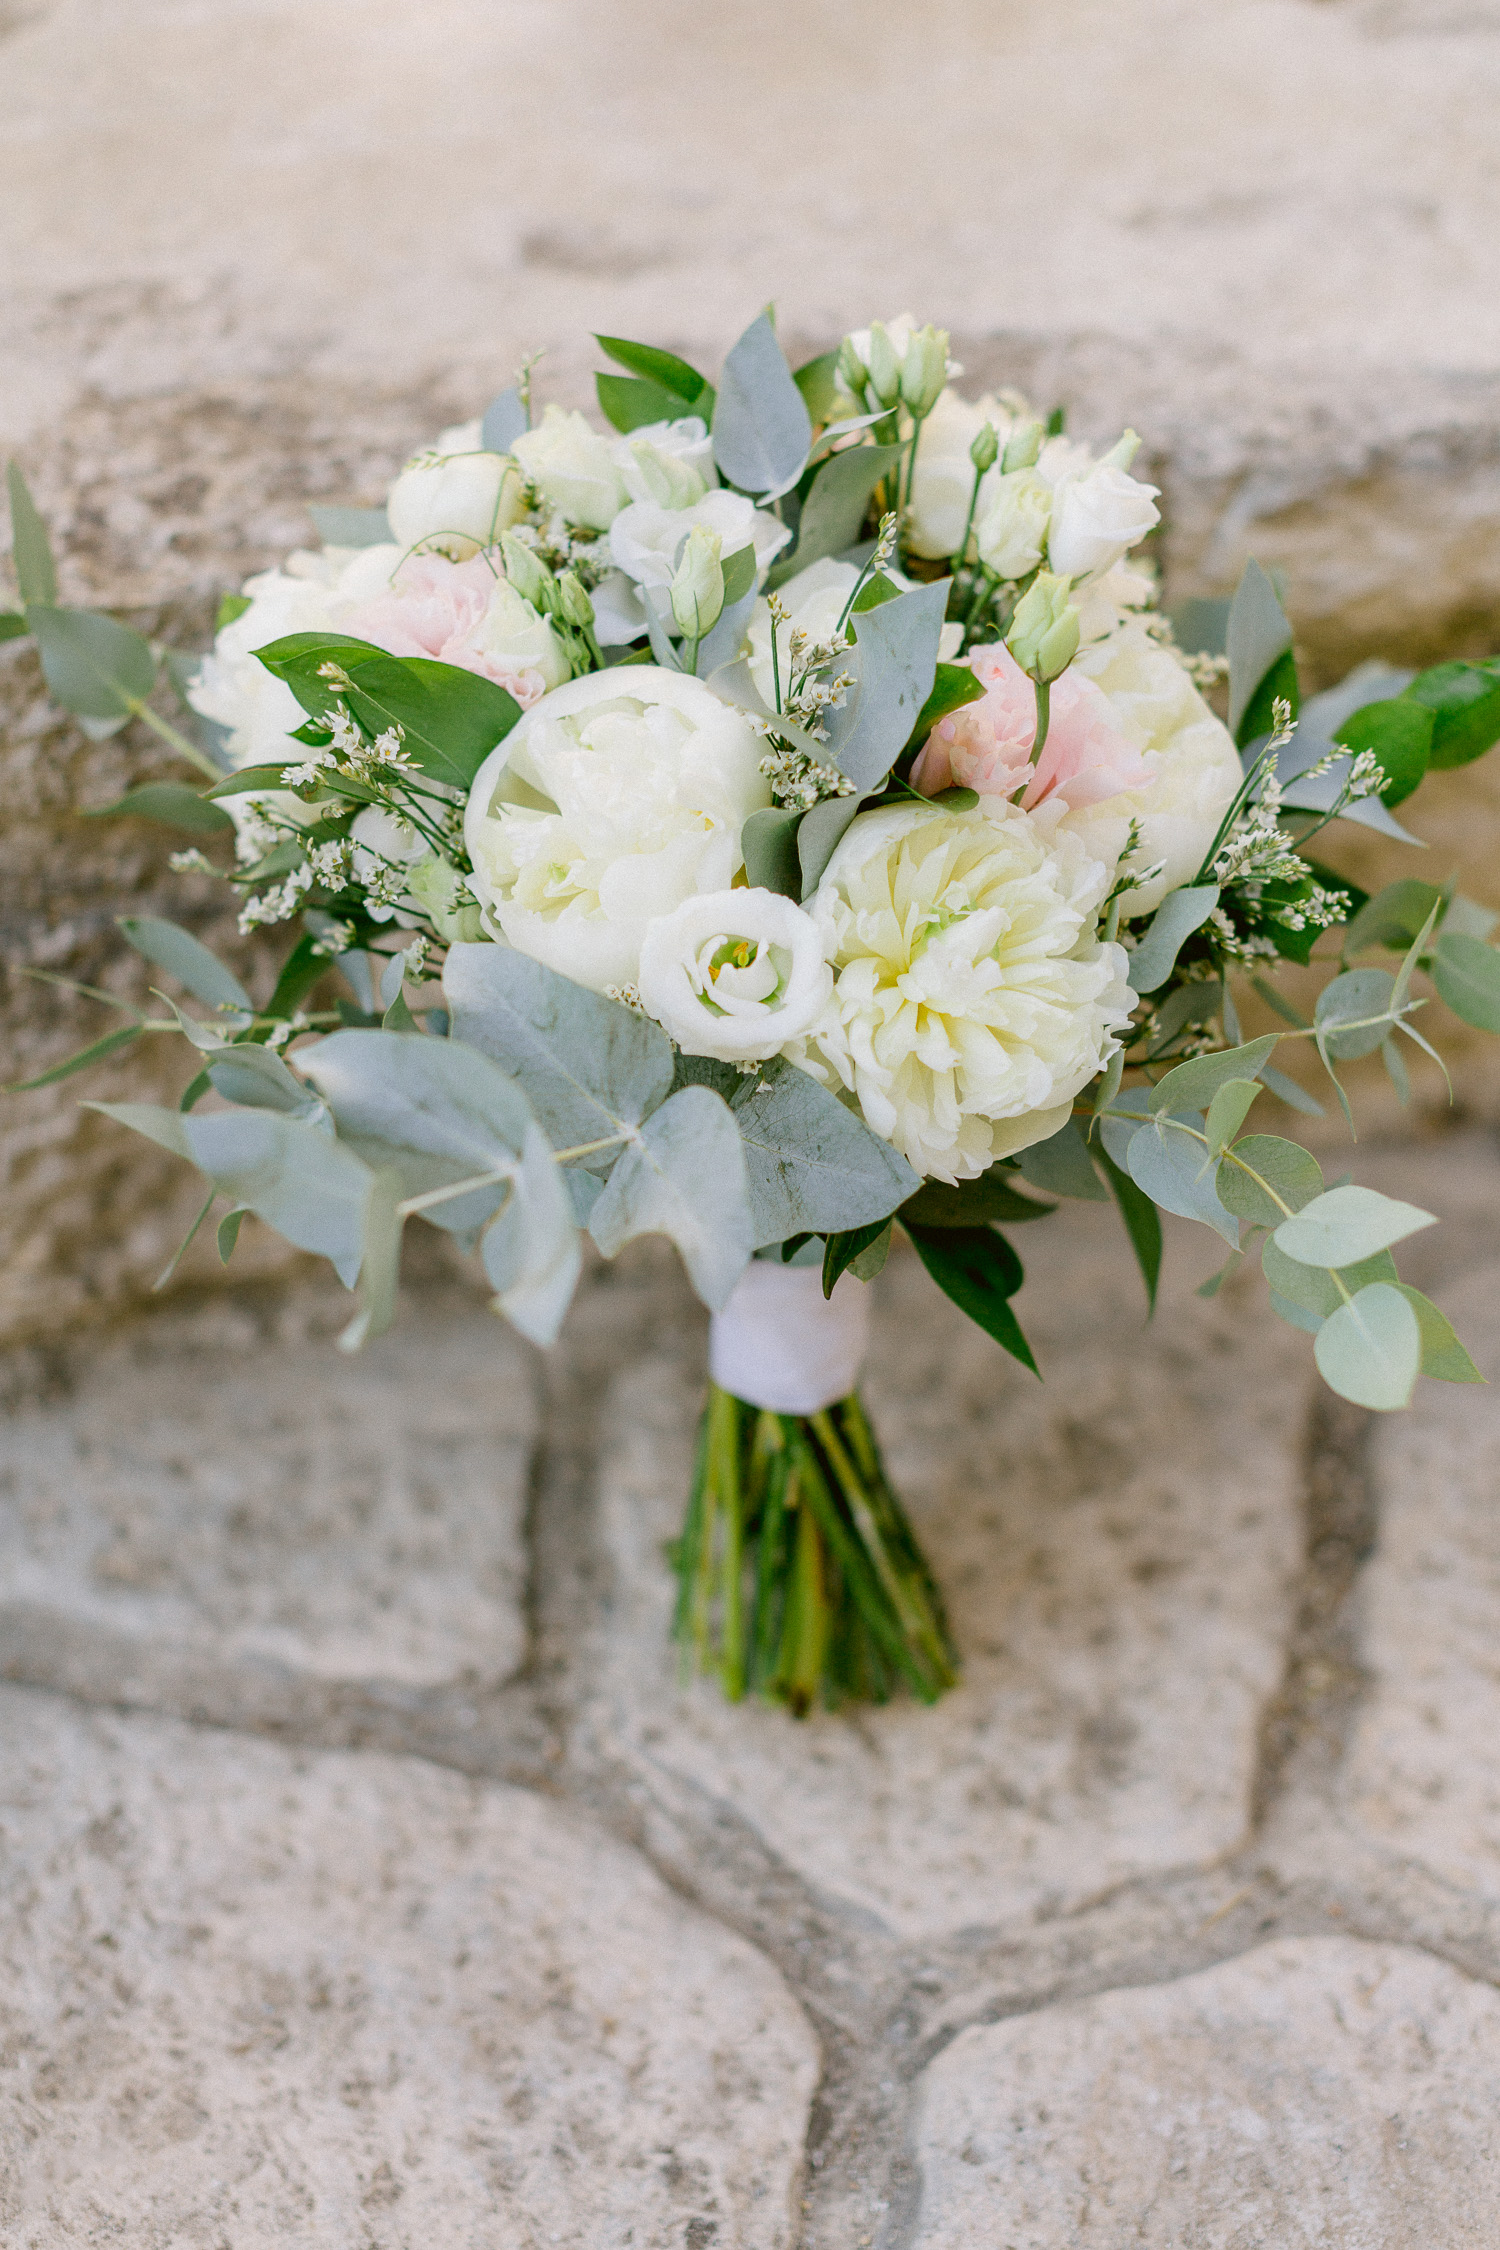 This romantic wedding bouquet made from white and pink blossoms is everything